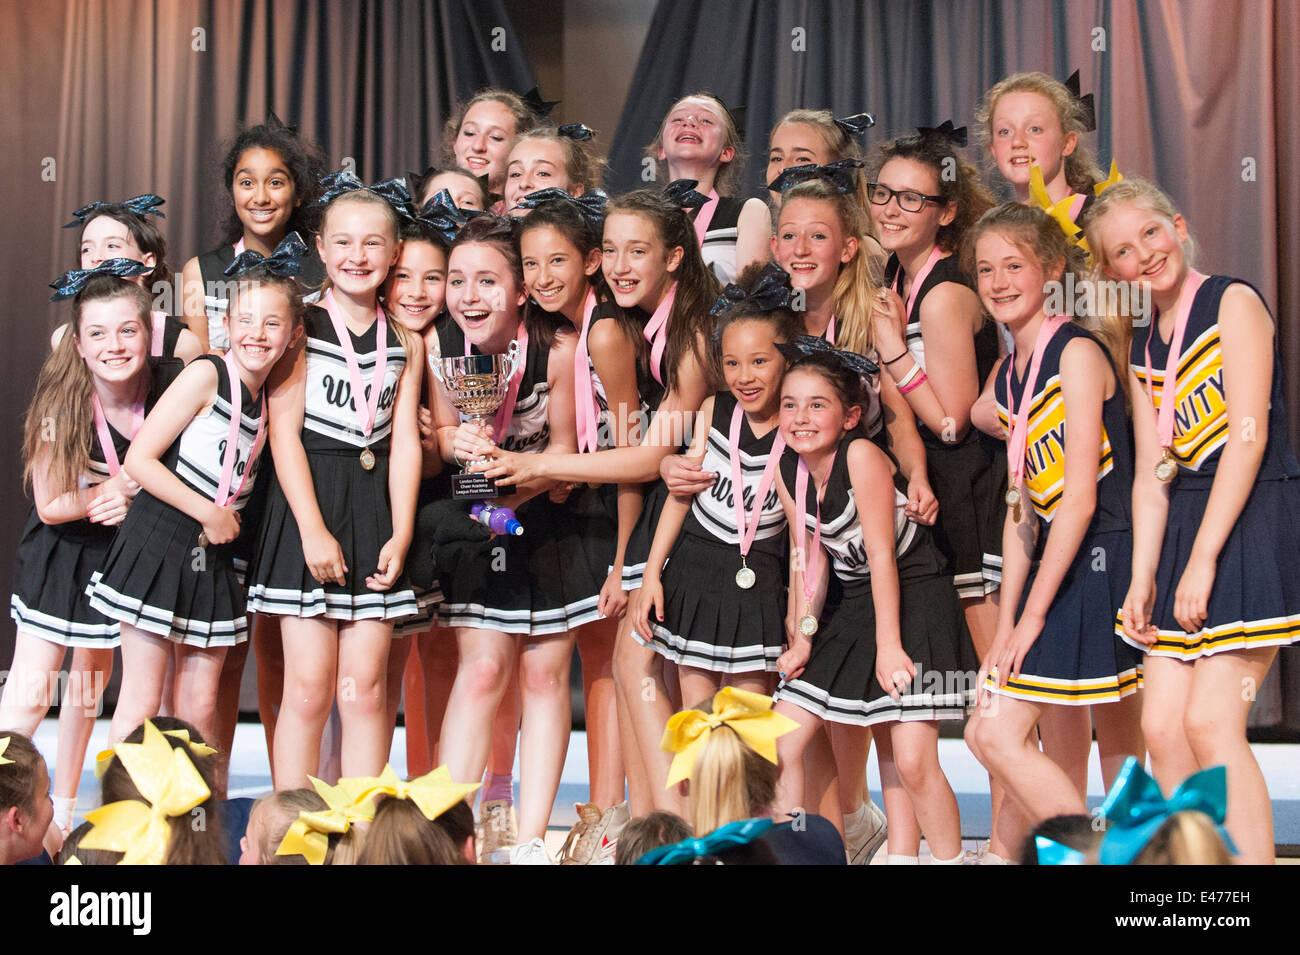 North West London junior cheer leading competition The Wolves winners champions 2014 line up on stage with medals Stock Photo